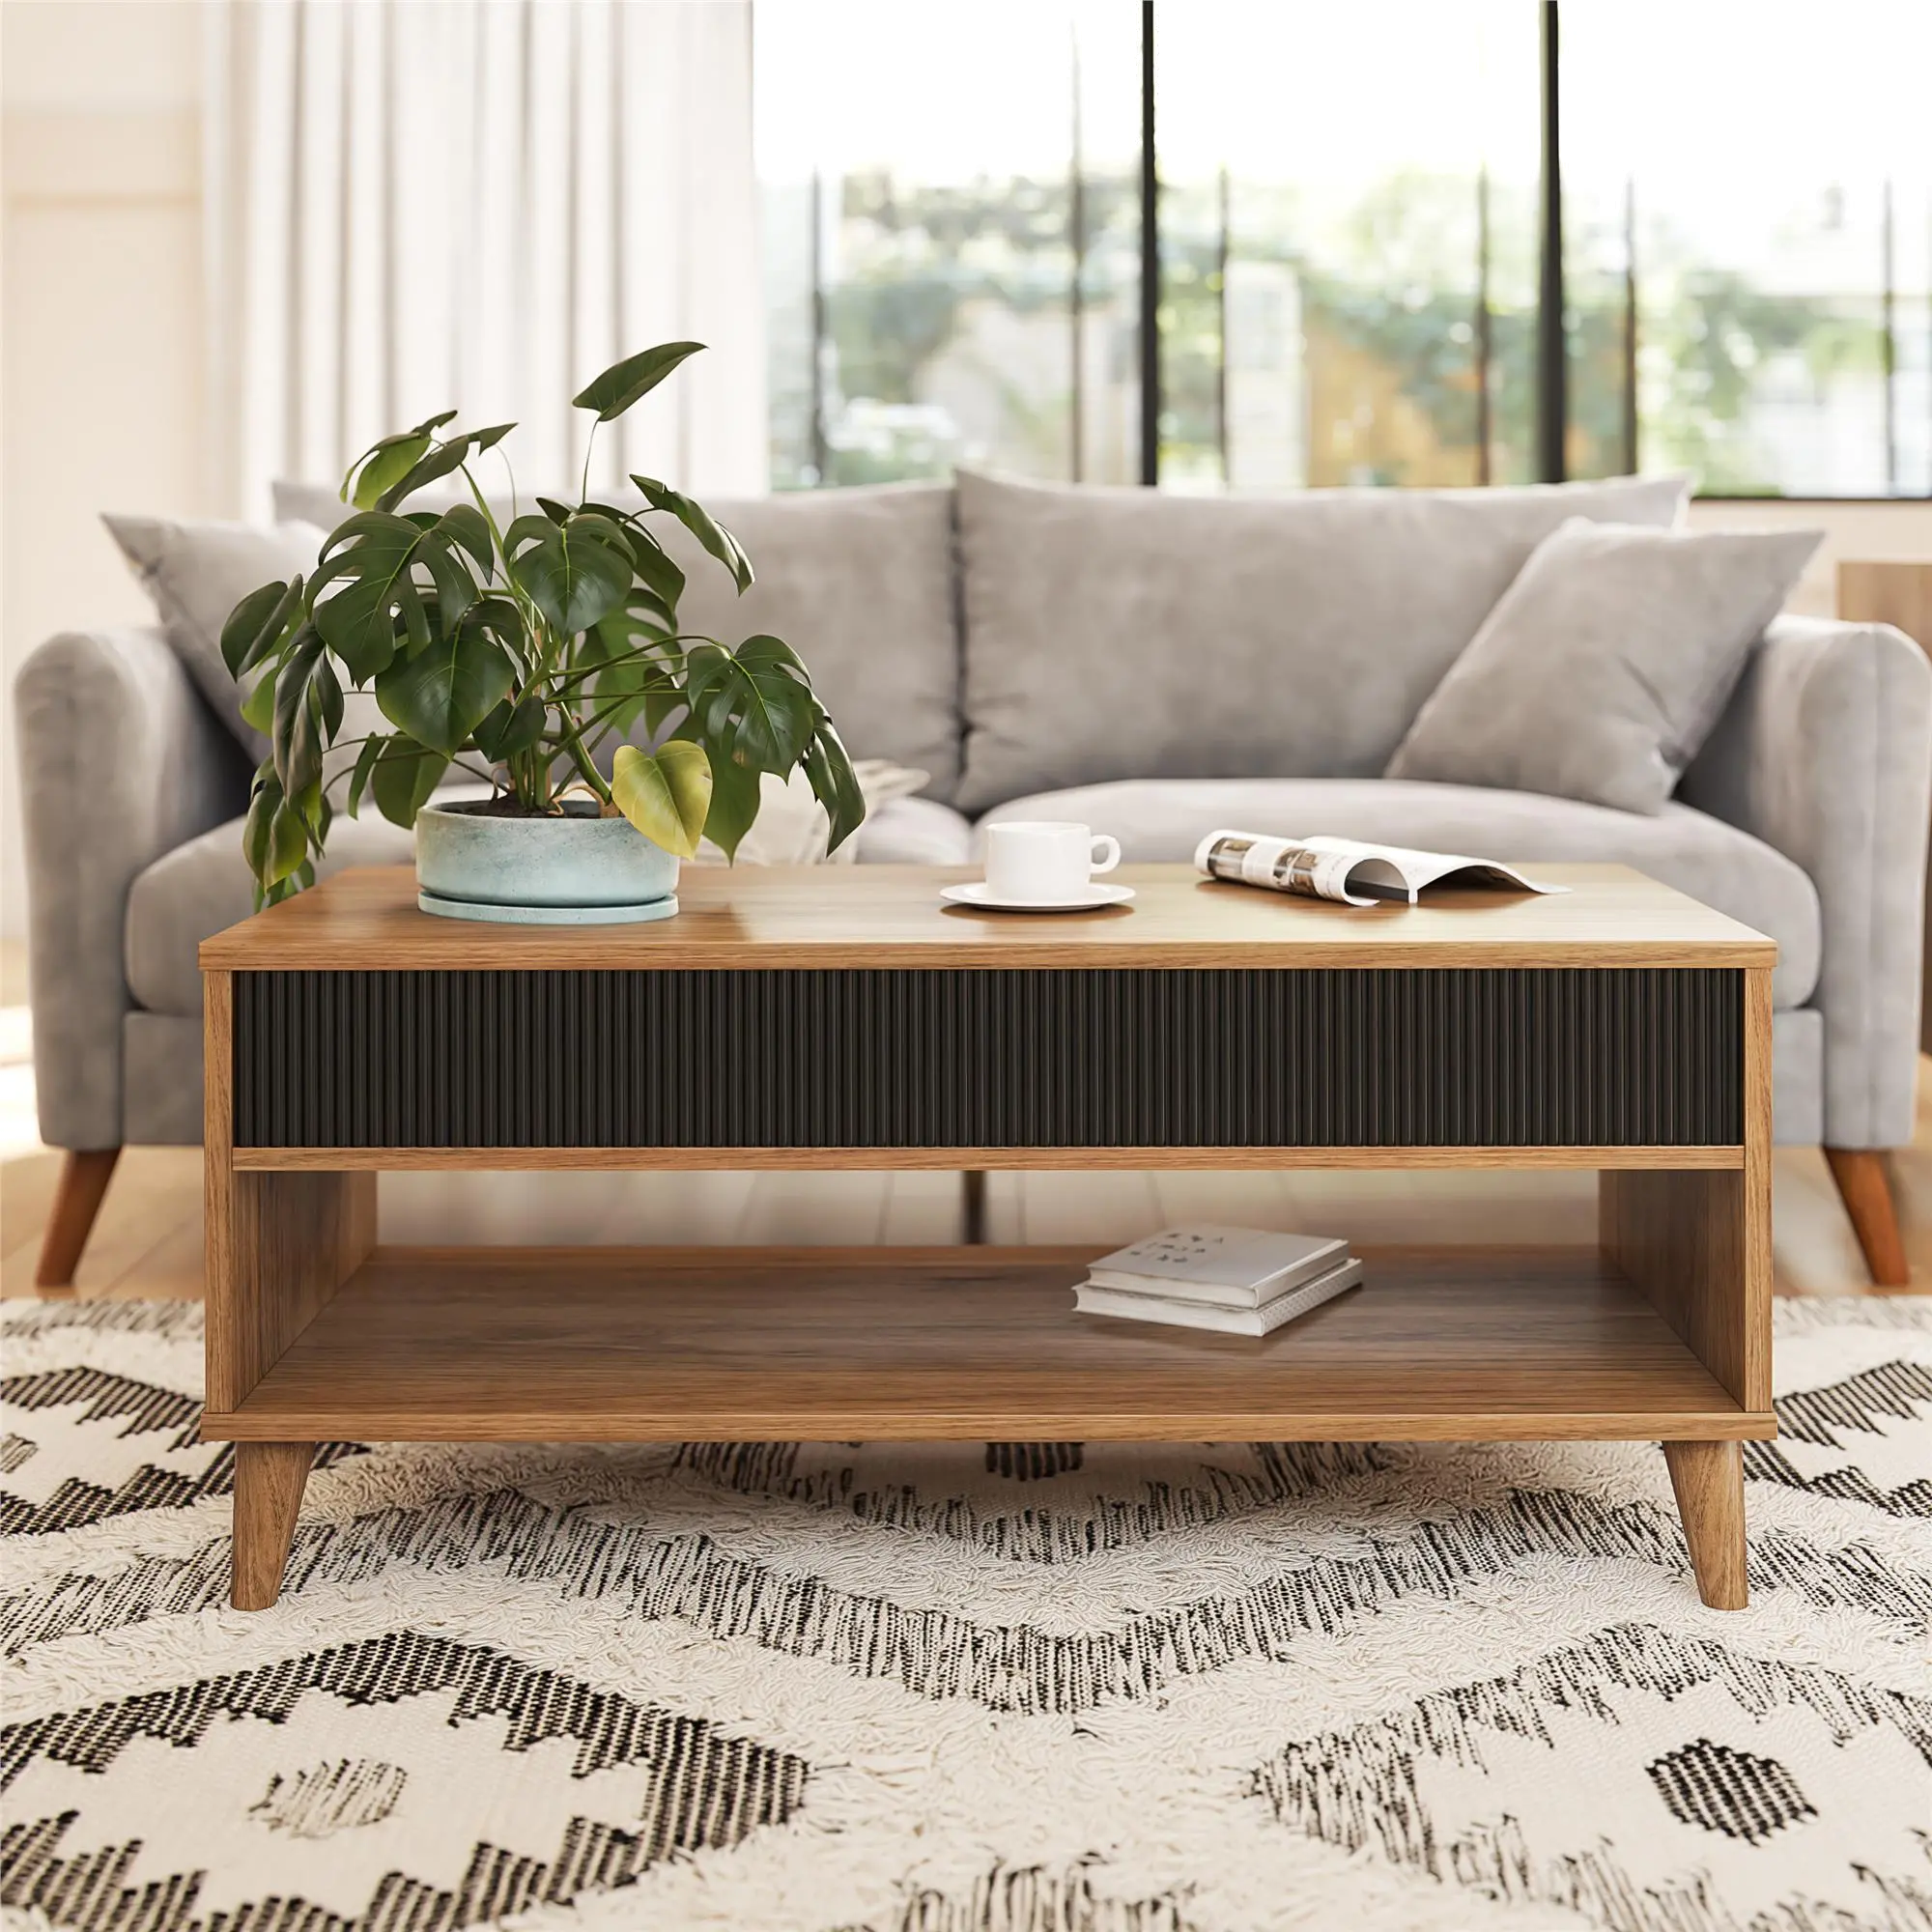 https://static.rcwilley.com/products/112912206/Magnolia-Walnut-and-Black-Lift-Top-Coffee-Table-rcwilley-image1.webp